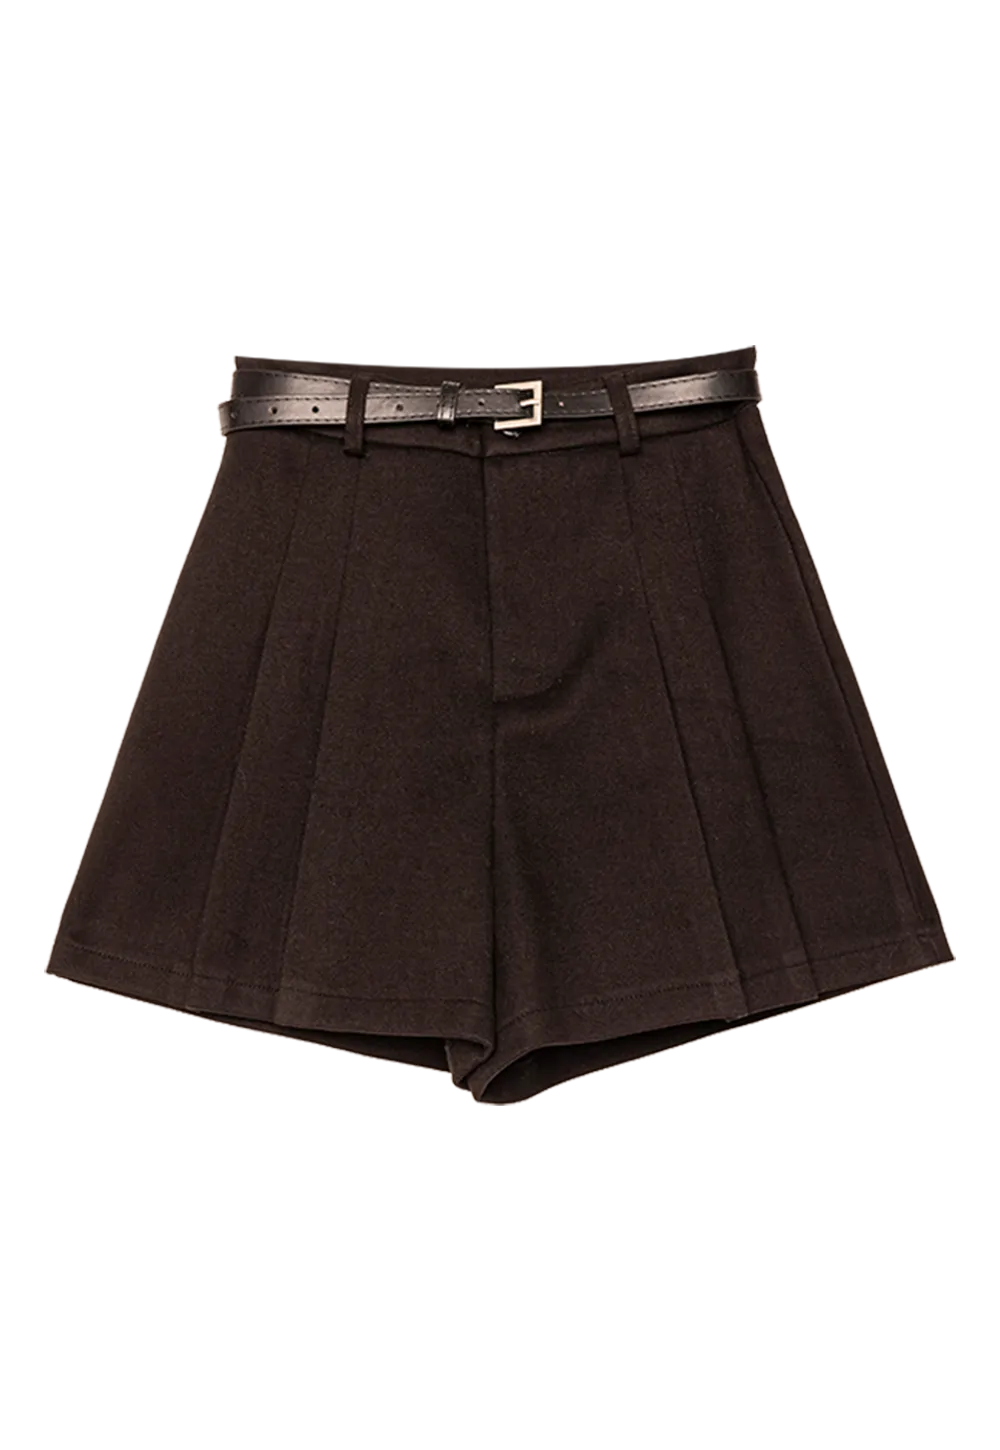 Woman's High-Waisted Pleated Shorts with Belt in Dark Brown